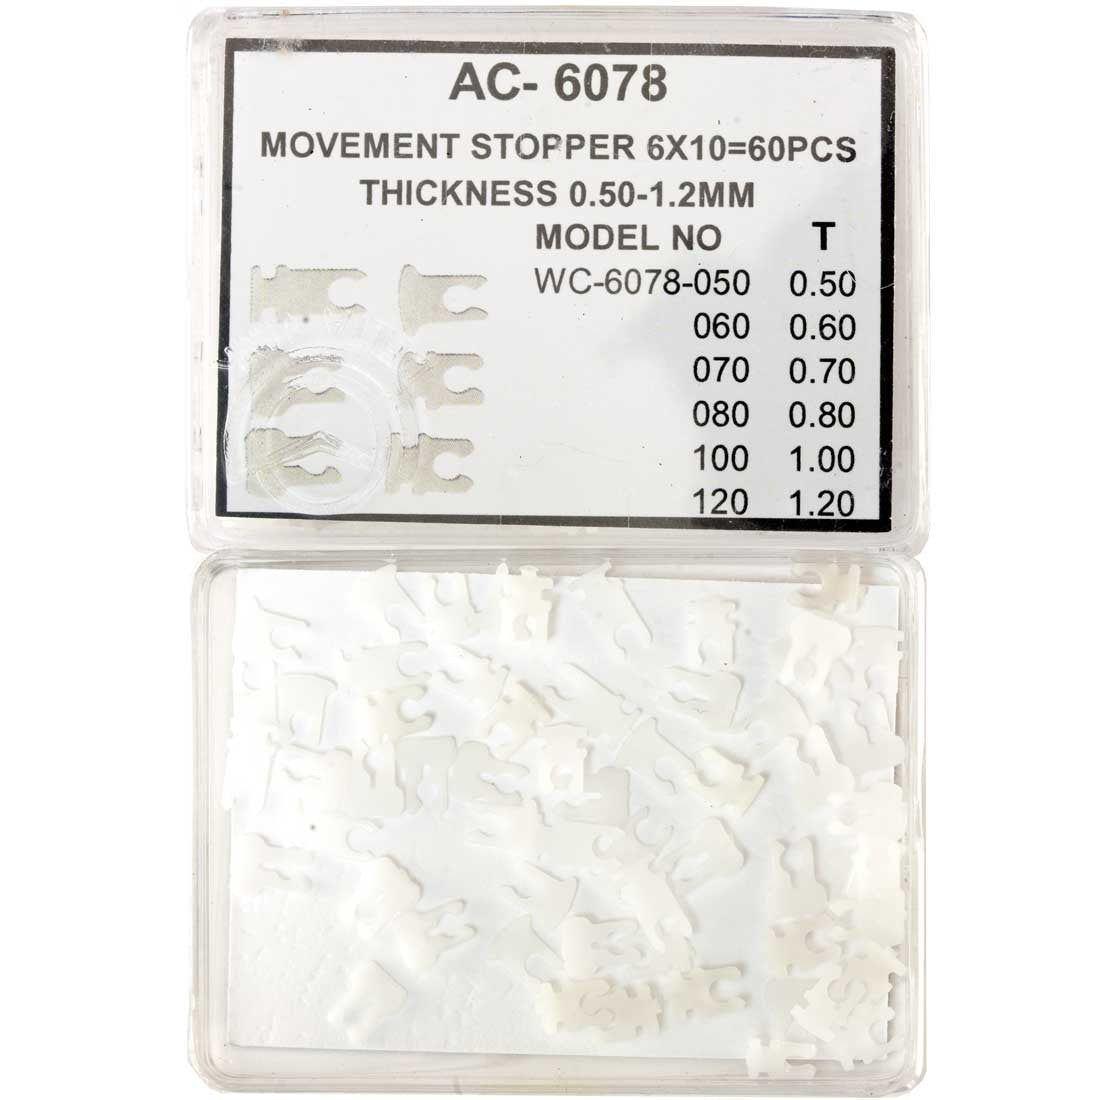 TC-165, Movement Stoppers (60 Pieces)